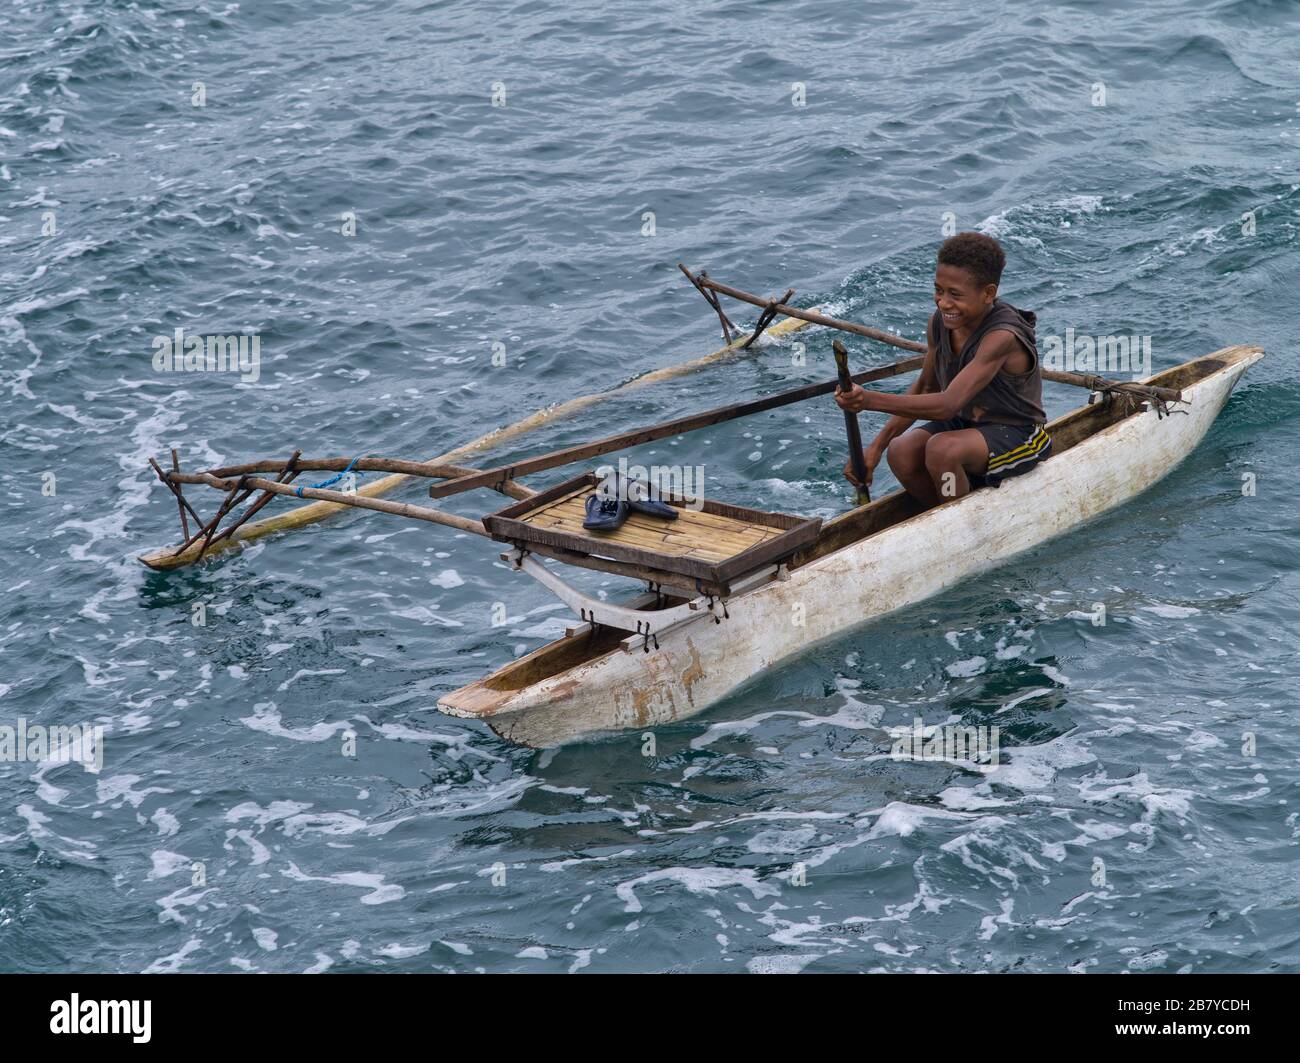 dh Native canoe outrigger MADANG PAPUA NEW GUINEA Local smiling boy boat in boat canoes png canoeing Stock Photo